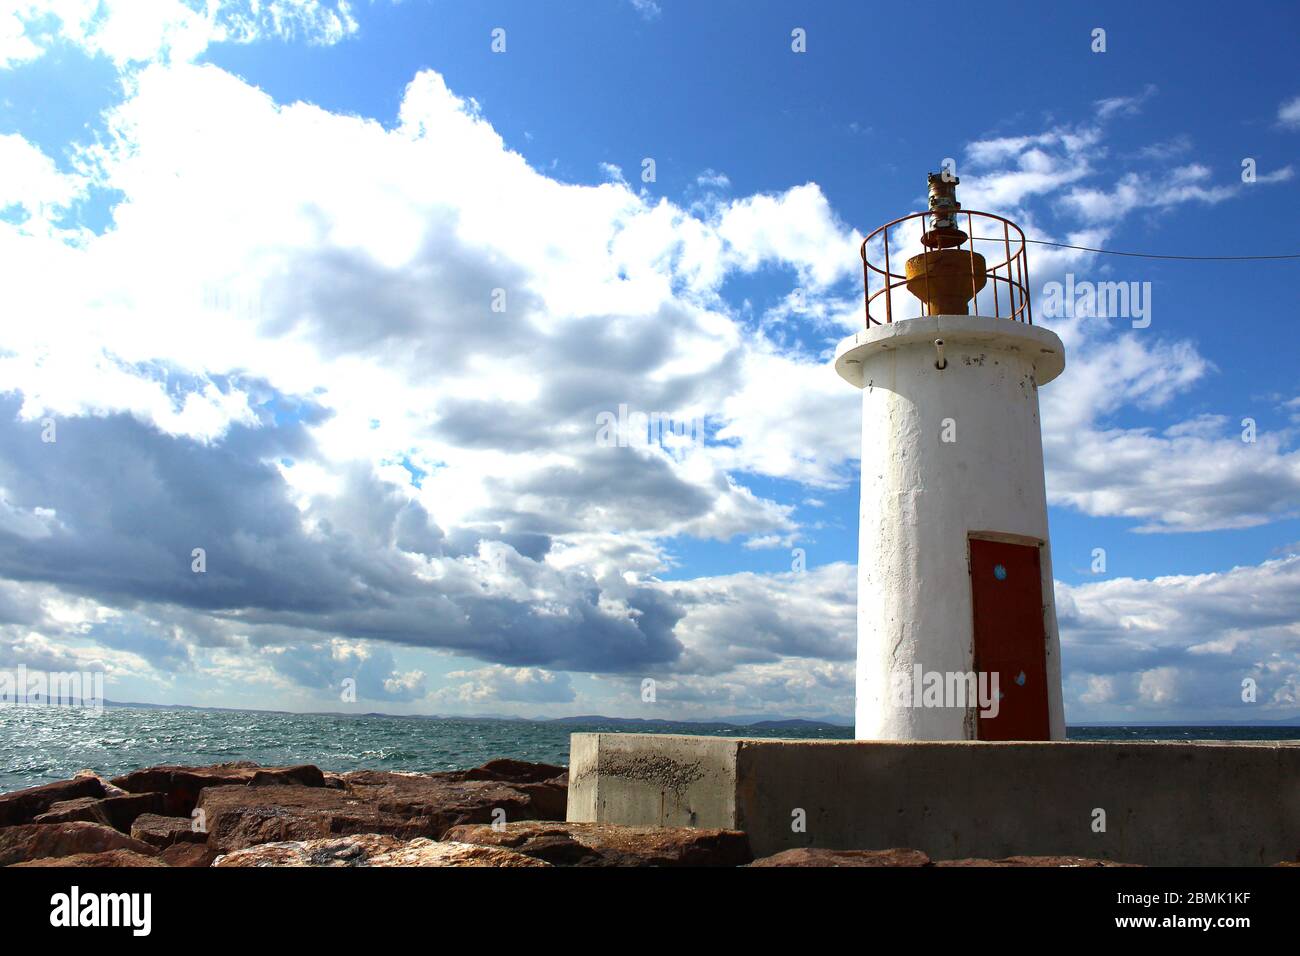 A port made of rocks and a white lighthouse. Wavy sea and cloudy windy weather. Stock Photo